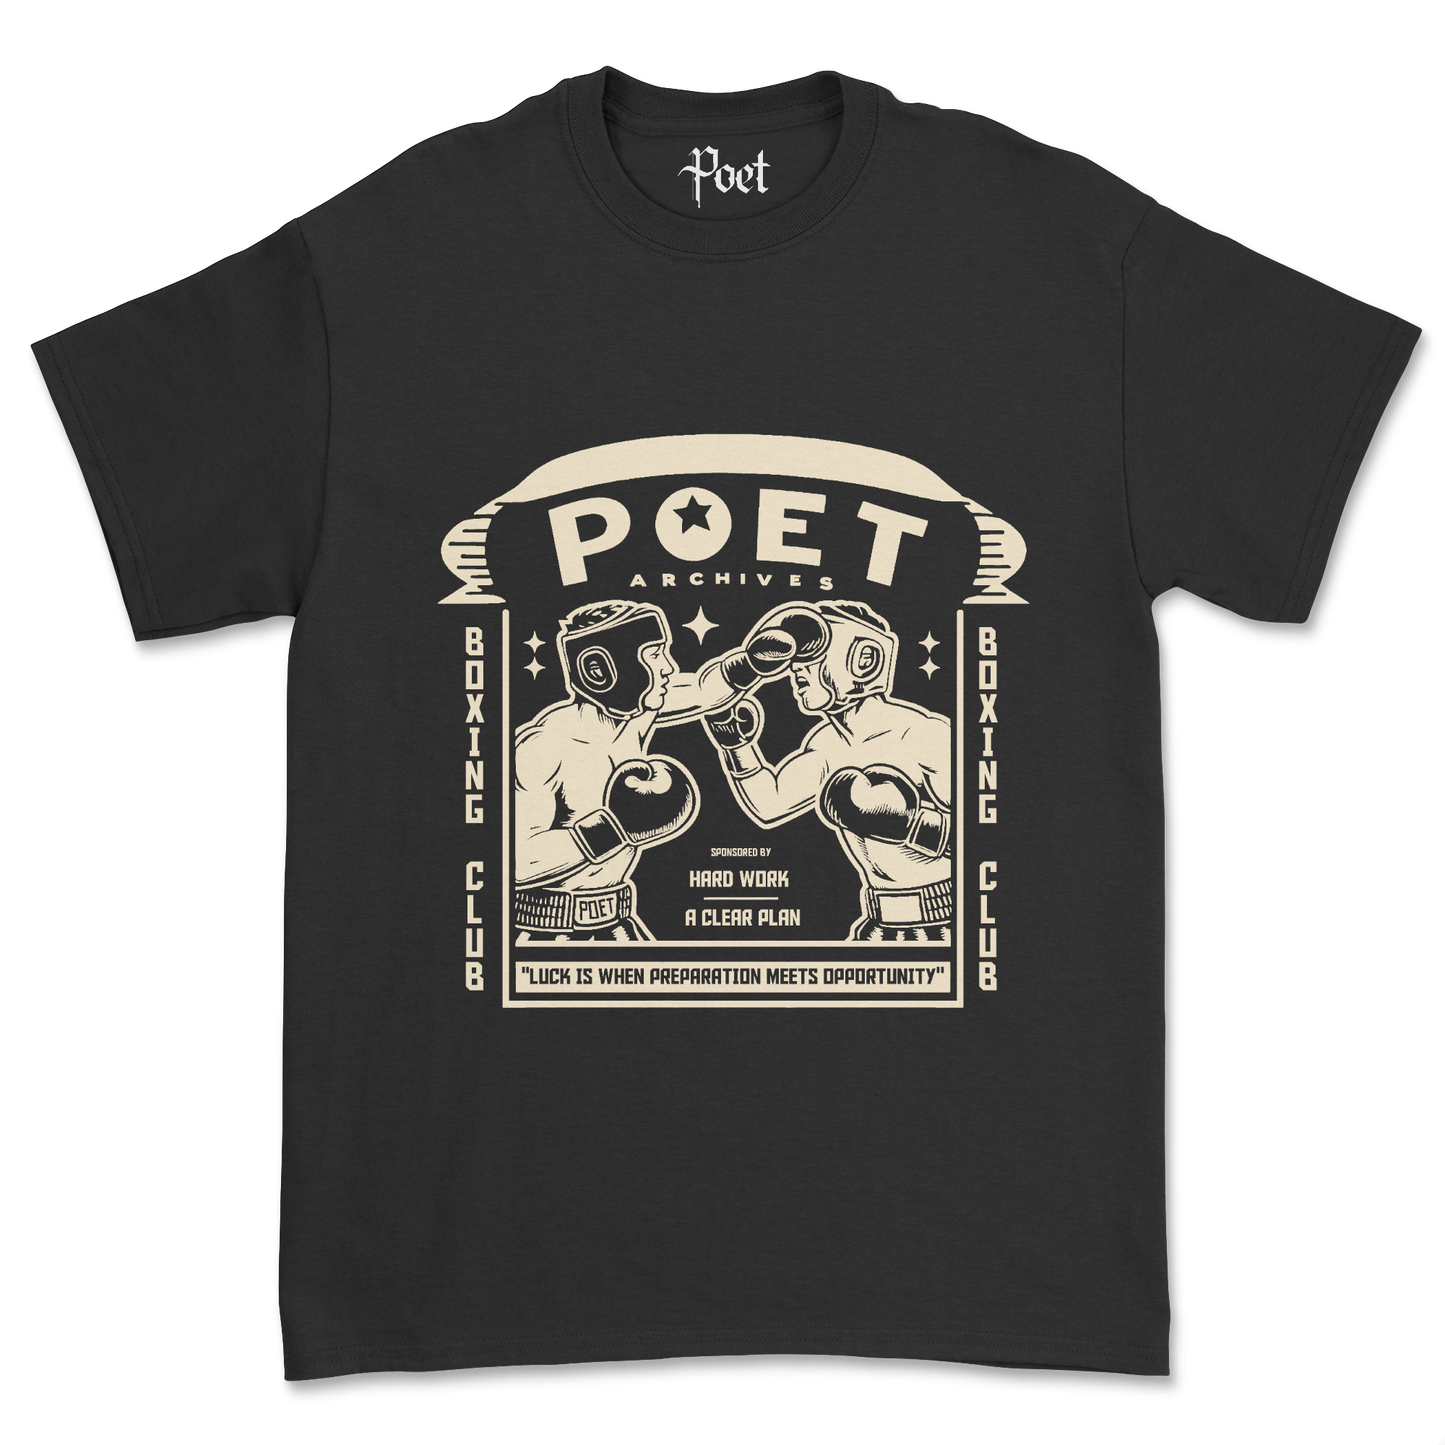 Boxing Club T-Shirt - Poet Archives